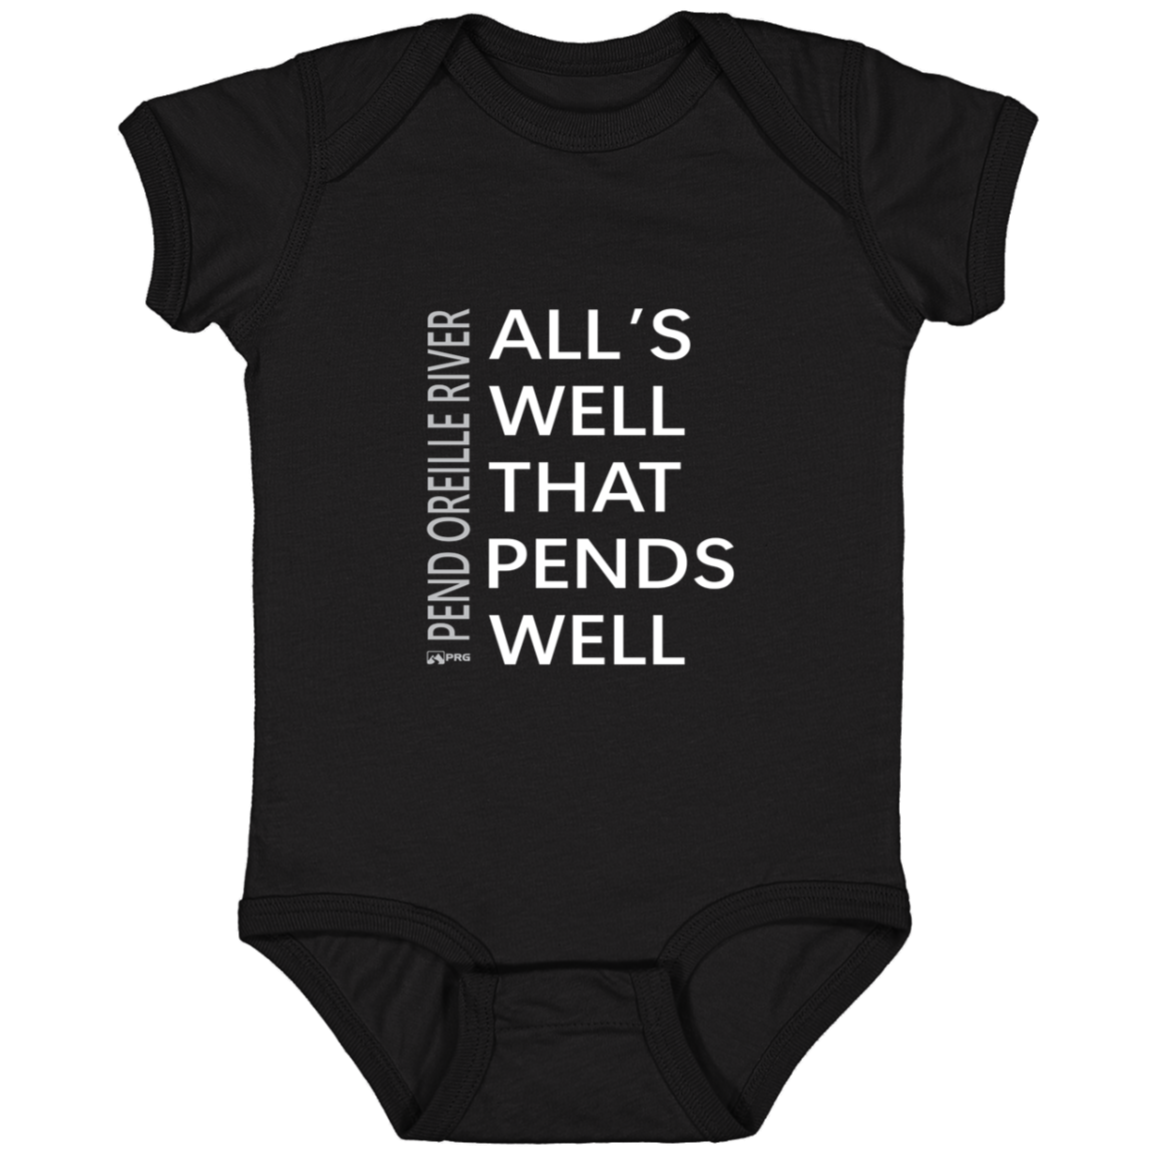 All's Well - Infant Onesie